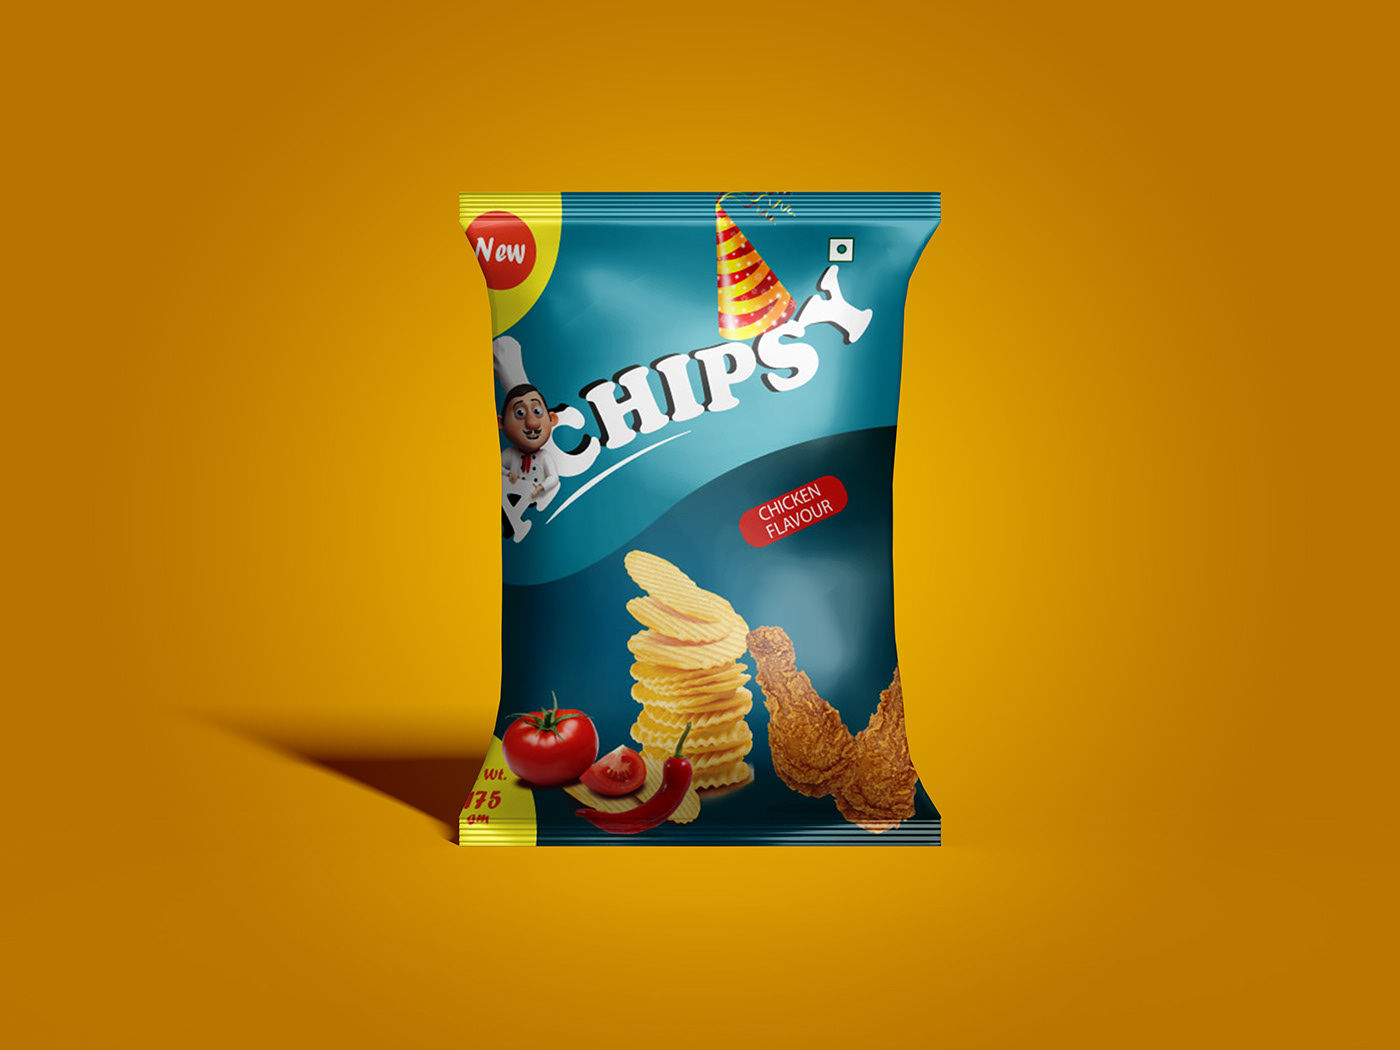 CHIPS PACKAGING  product design  Packaging Level Design Products Packaging package packaging design Advertising  package design  product brand identity